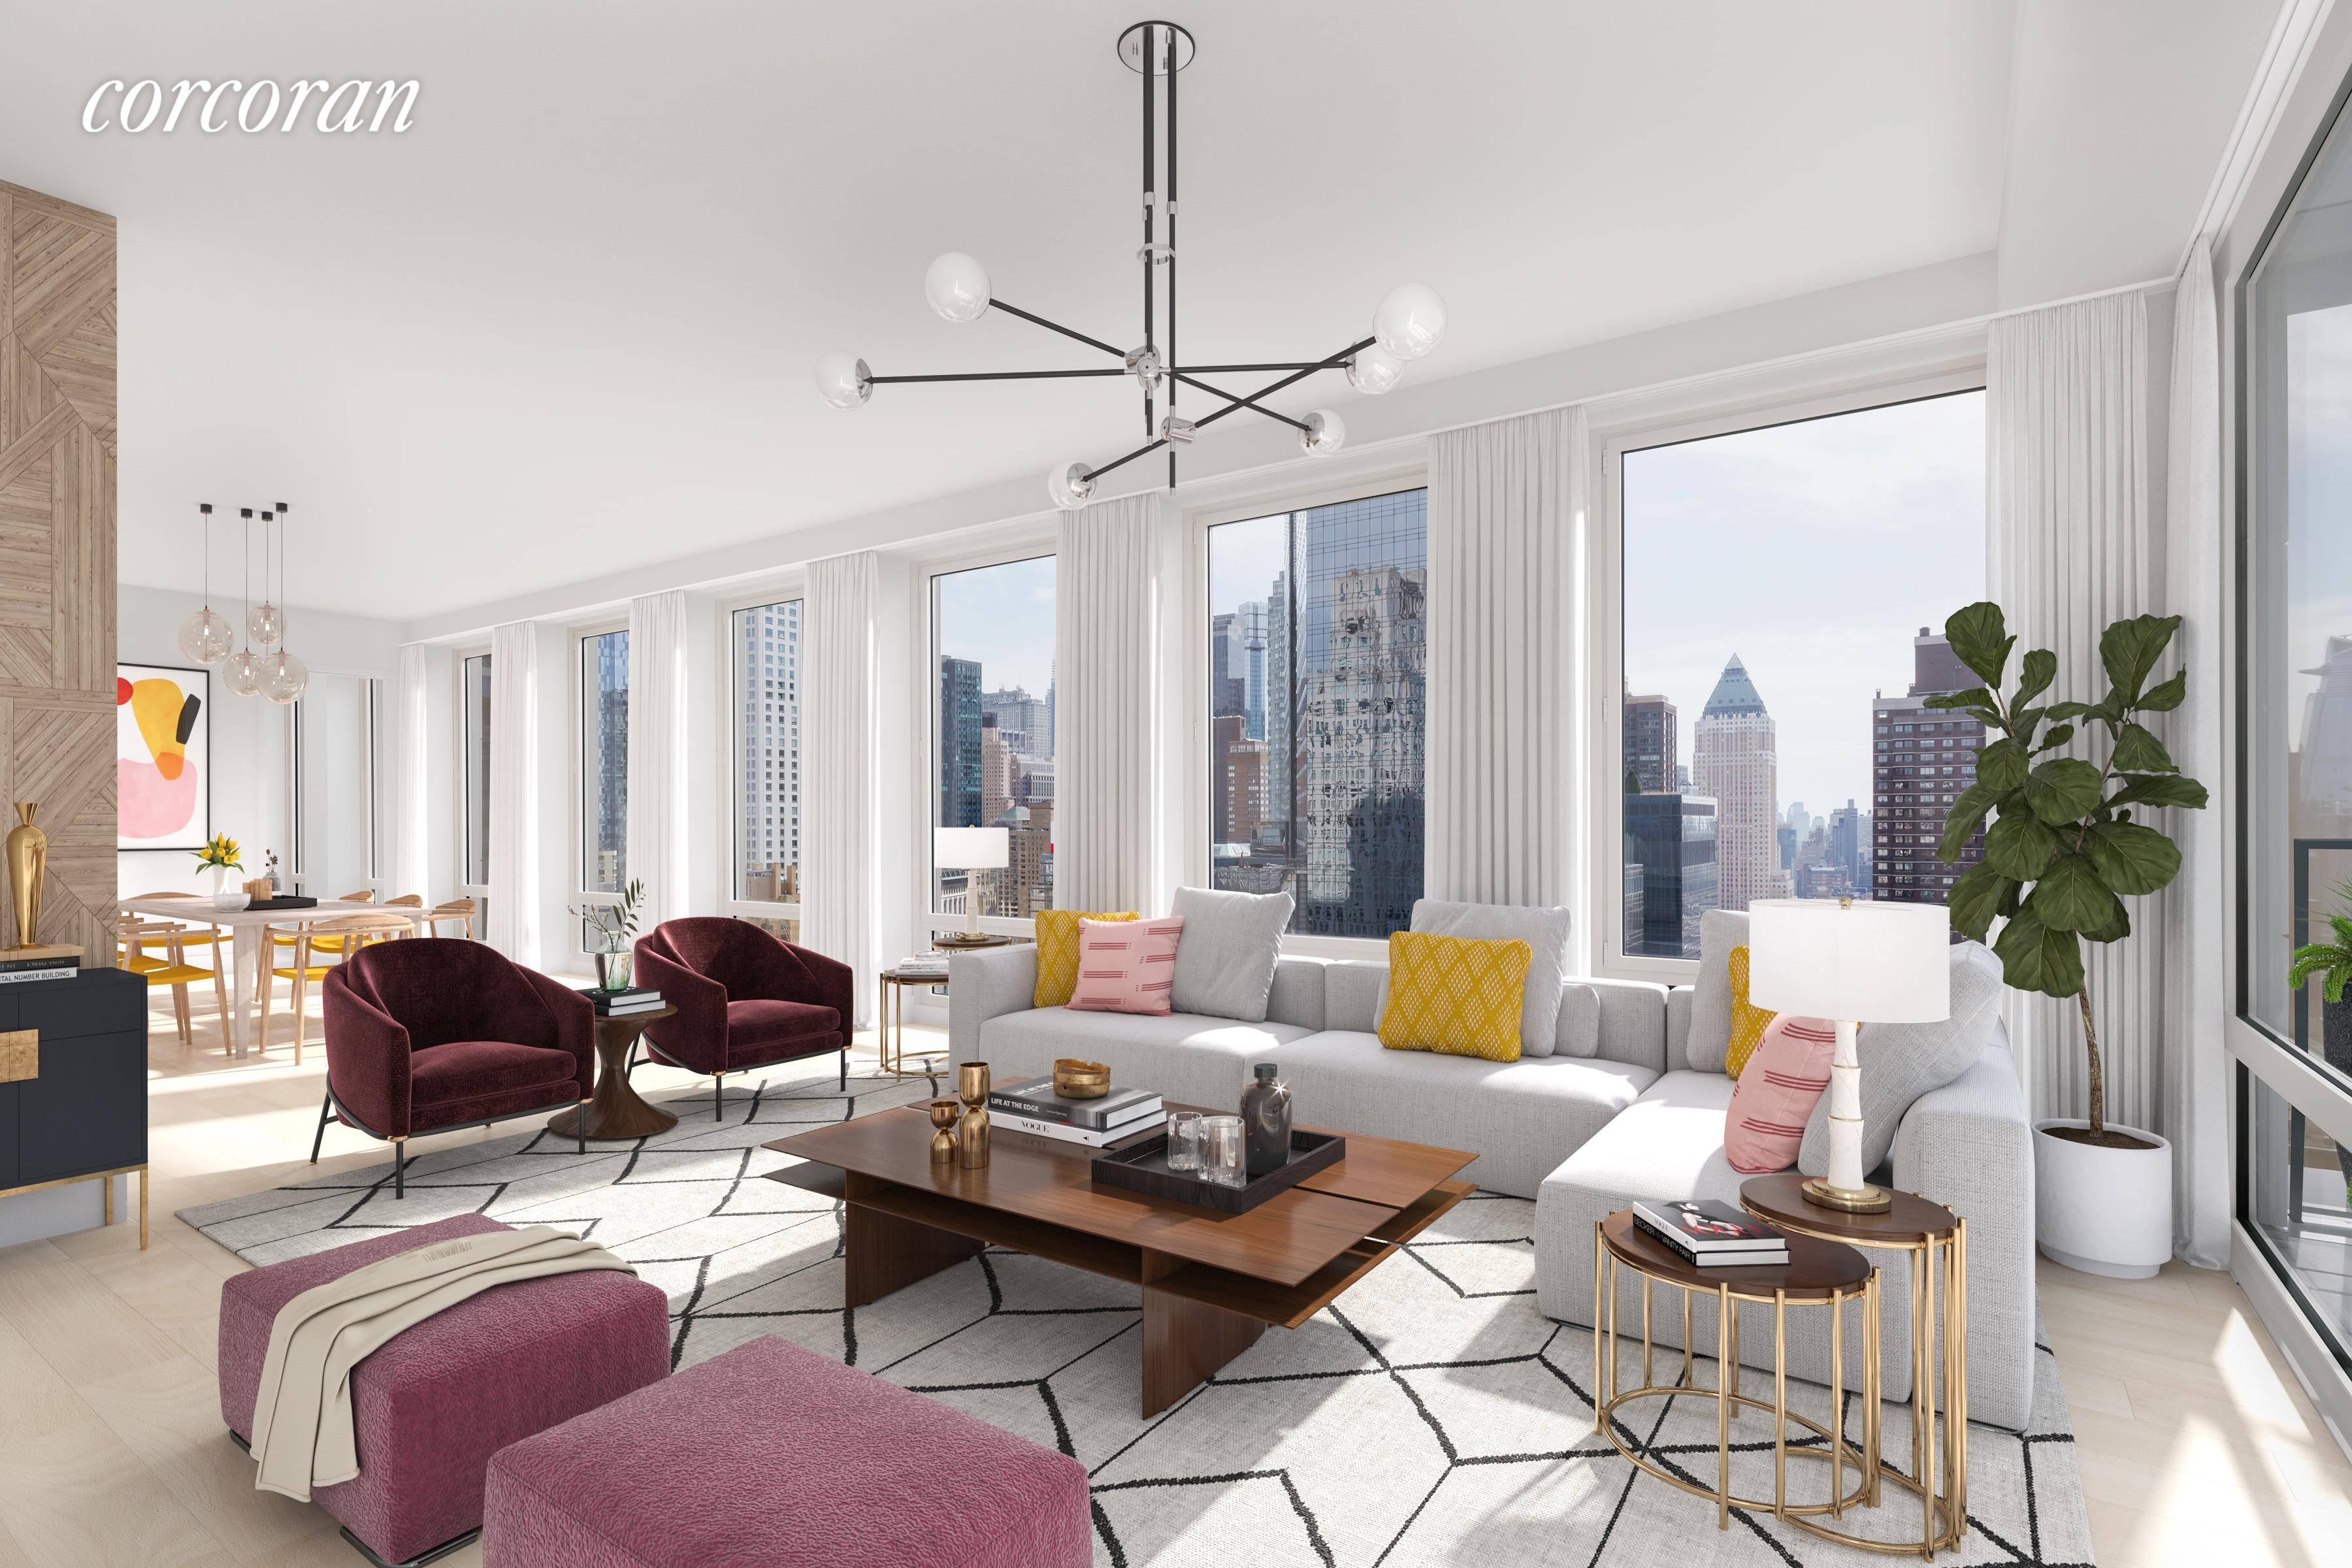 LAST PENTHOUSE AVAILABLE in NYC's newest condominium in NYC's most coveted neighborhood.